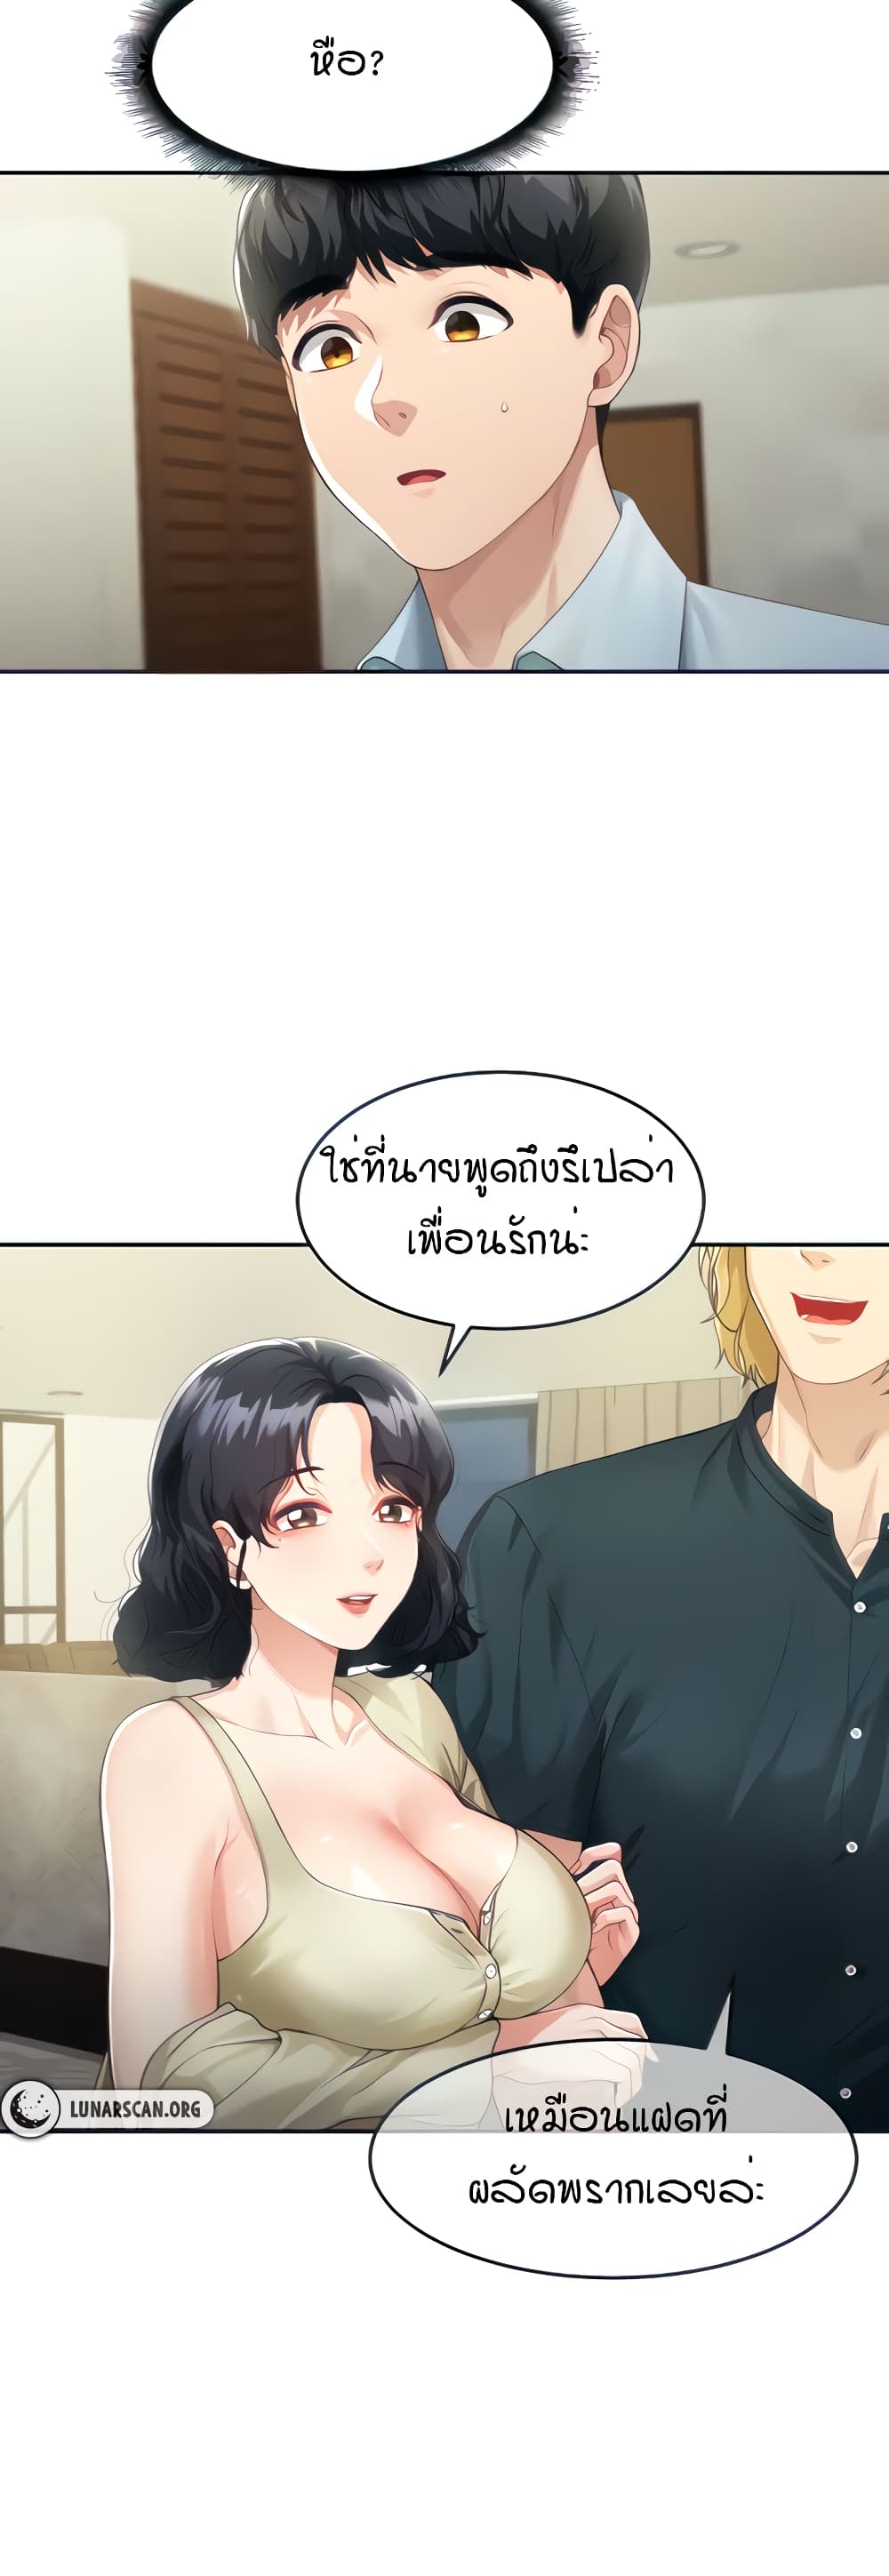 Is It Your Mother or Sister? ตอนที่ 2 ภาพ 26